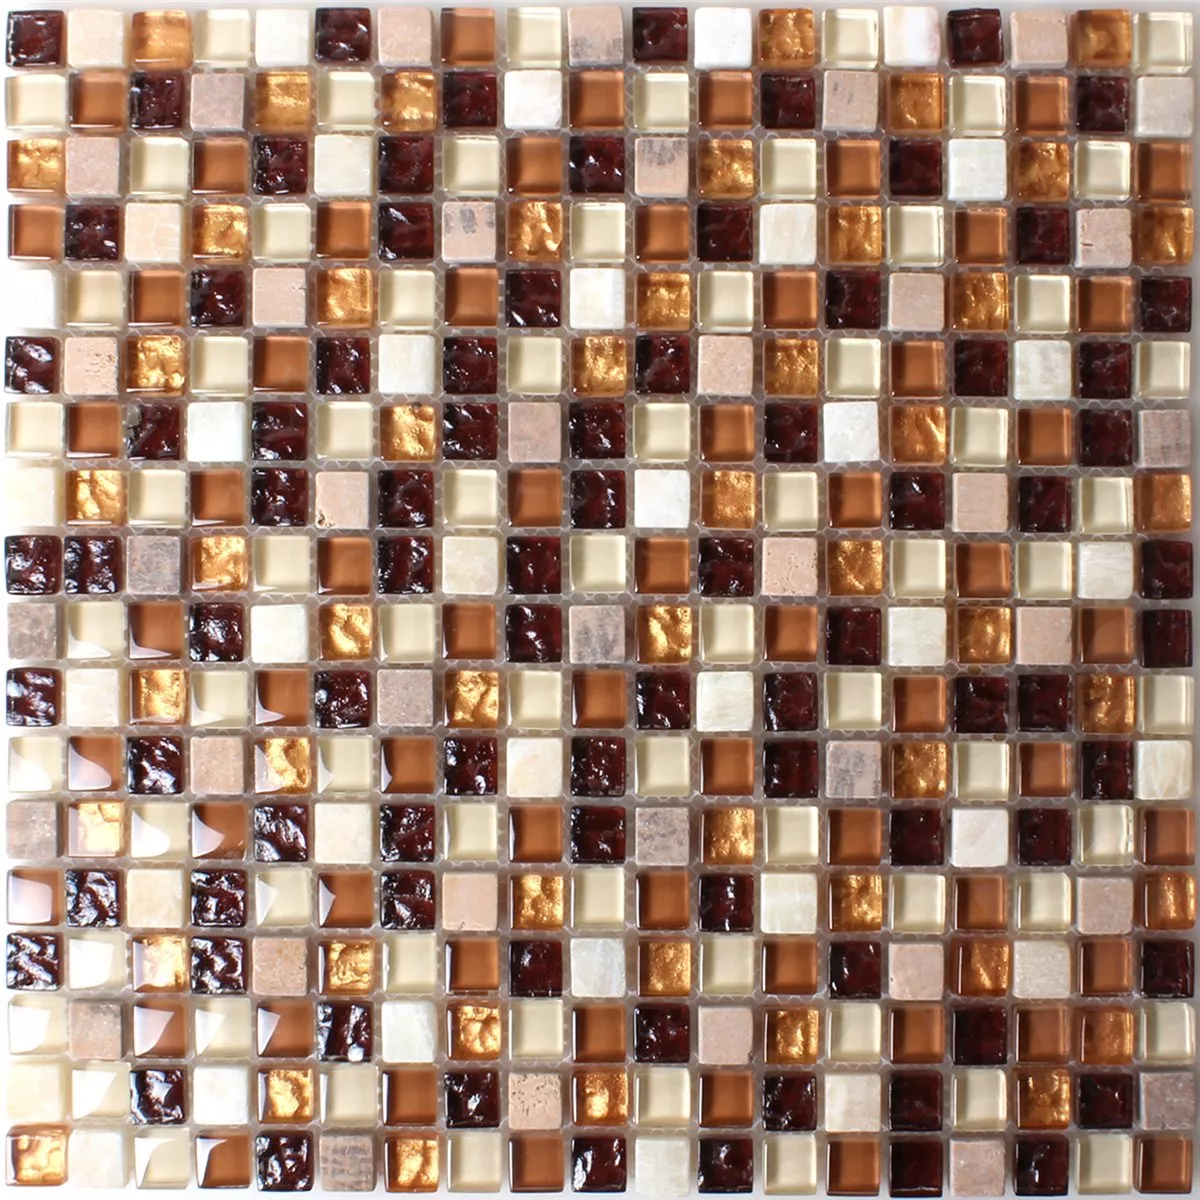 Sample Mosaic Tiles Onyx Marble Brown Mix